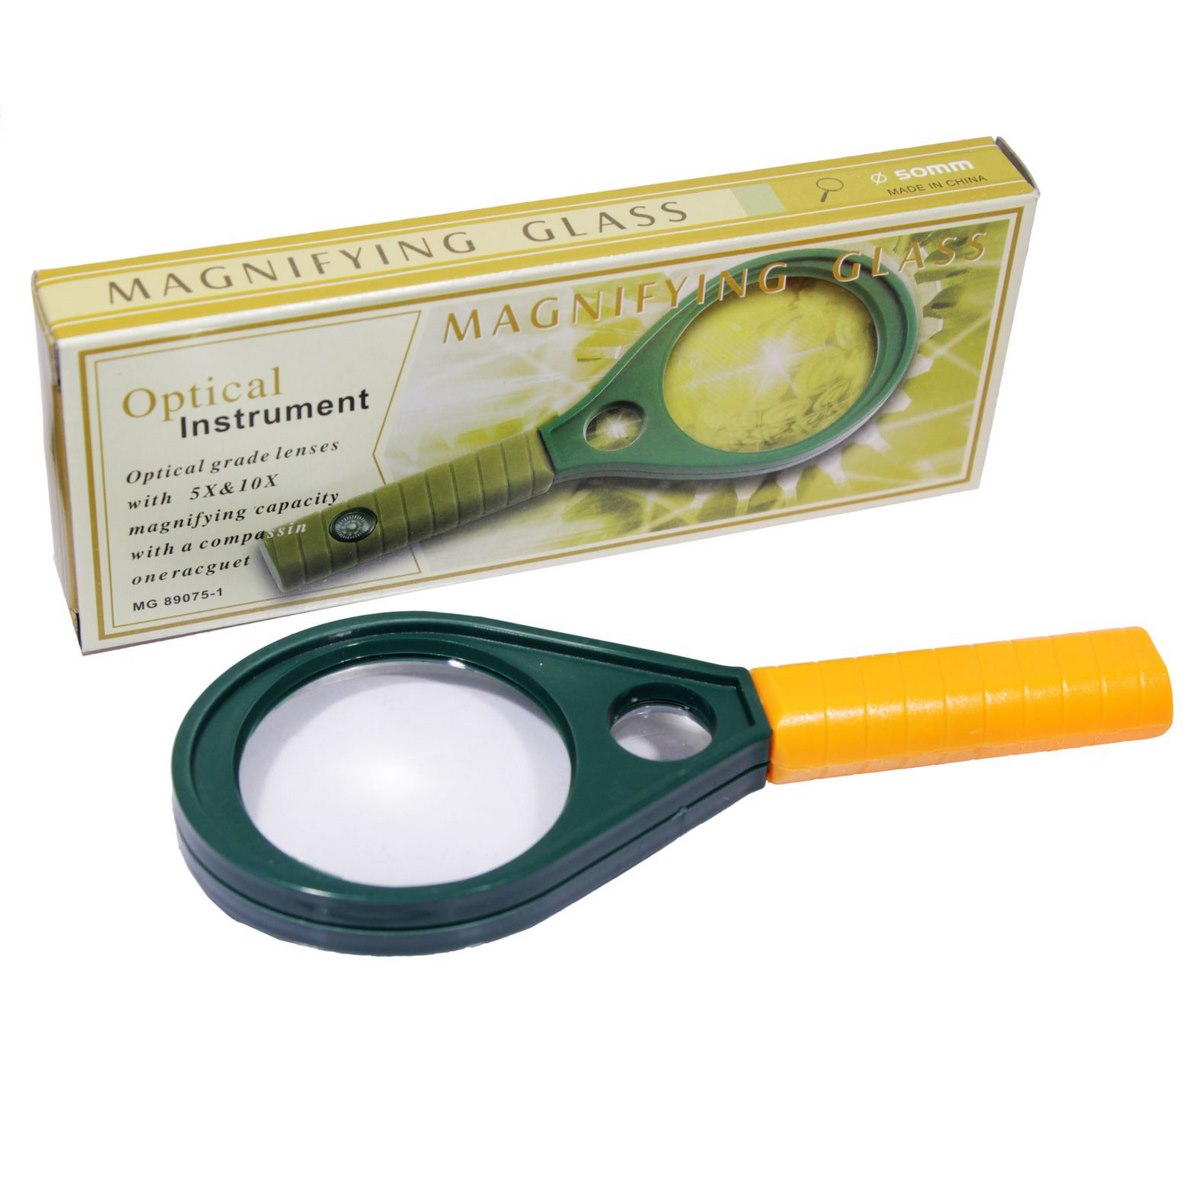 Magnifying Glass 65mm - For Office Use, Students, Professionals, Personal Use, Corporate Gifting, Return Gift